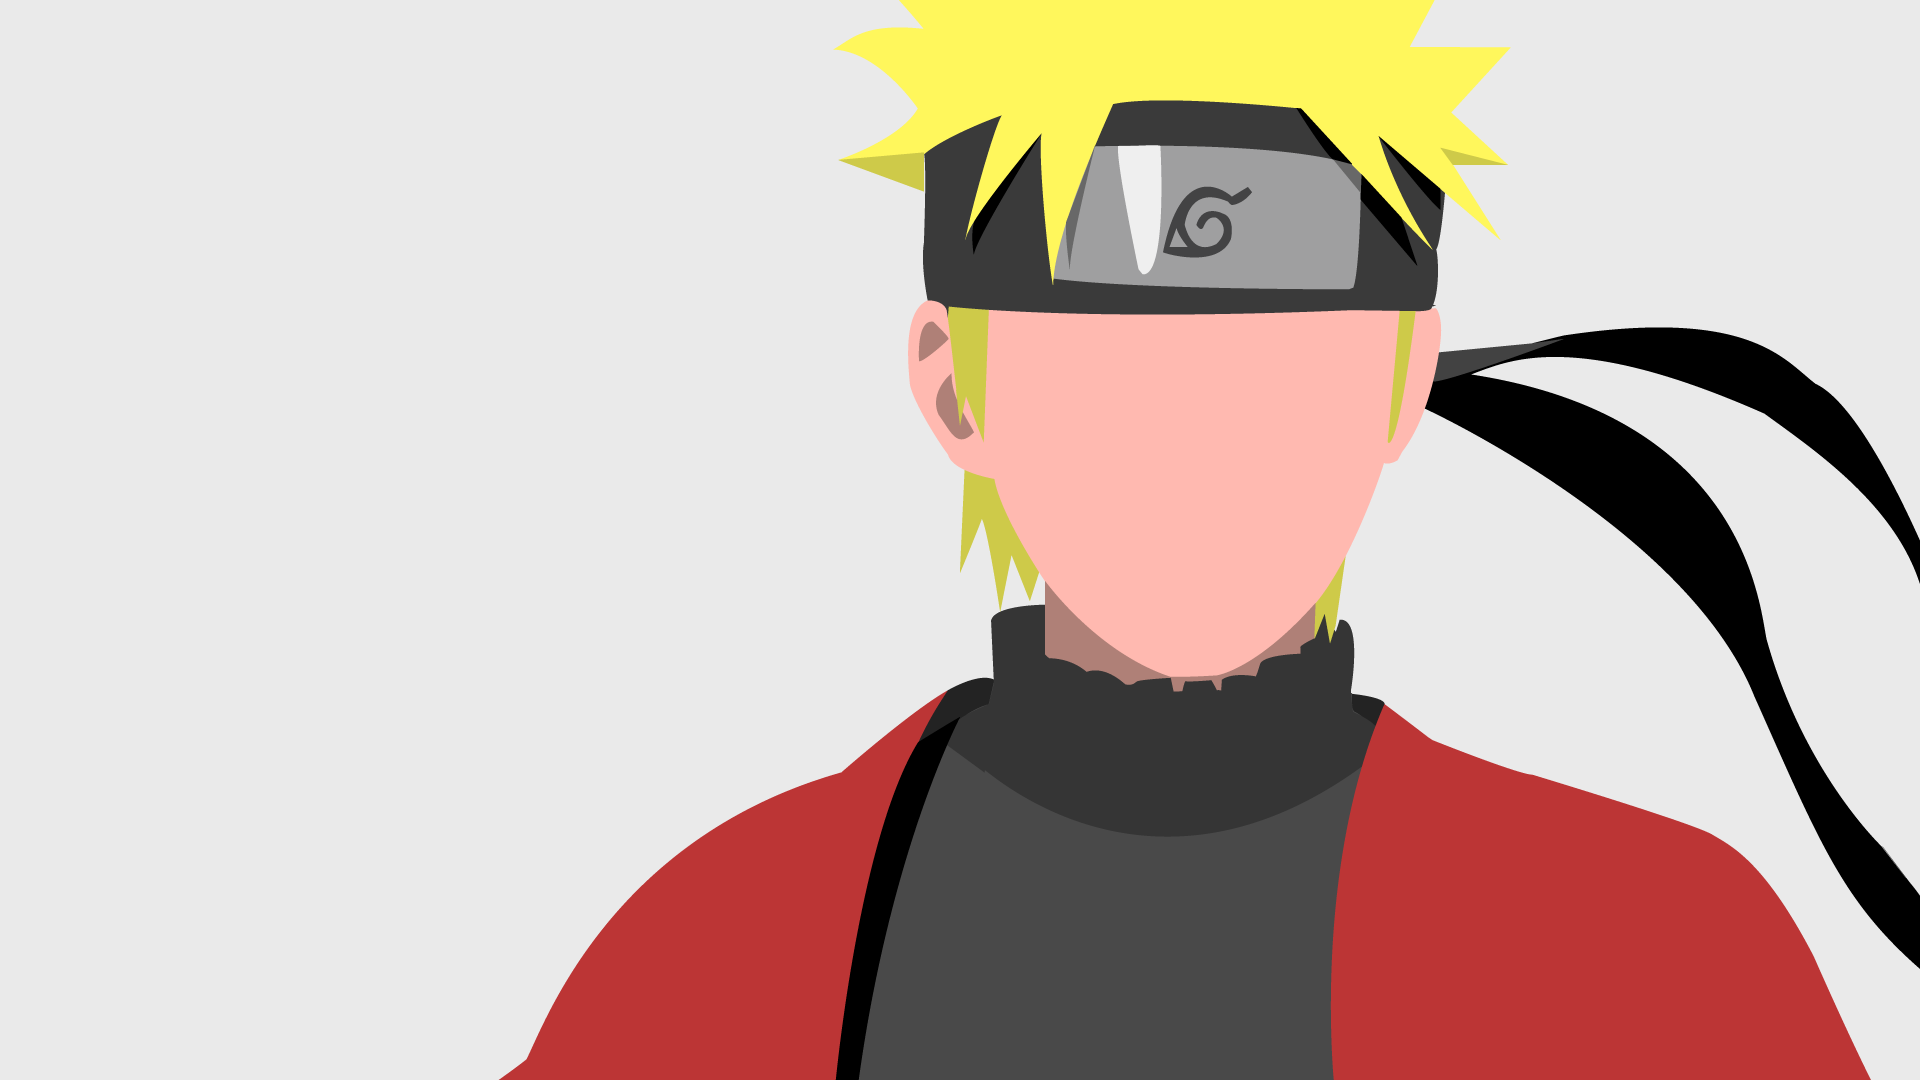 Anime Naruto 4k Ultra HD Wallpaper by DT501061 余佳軒